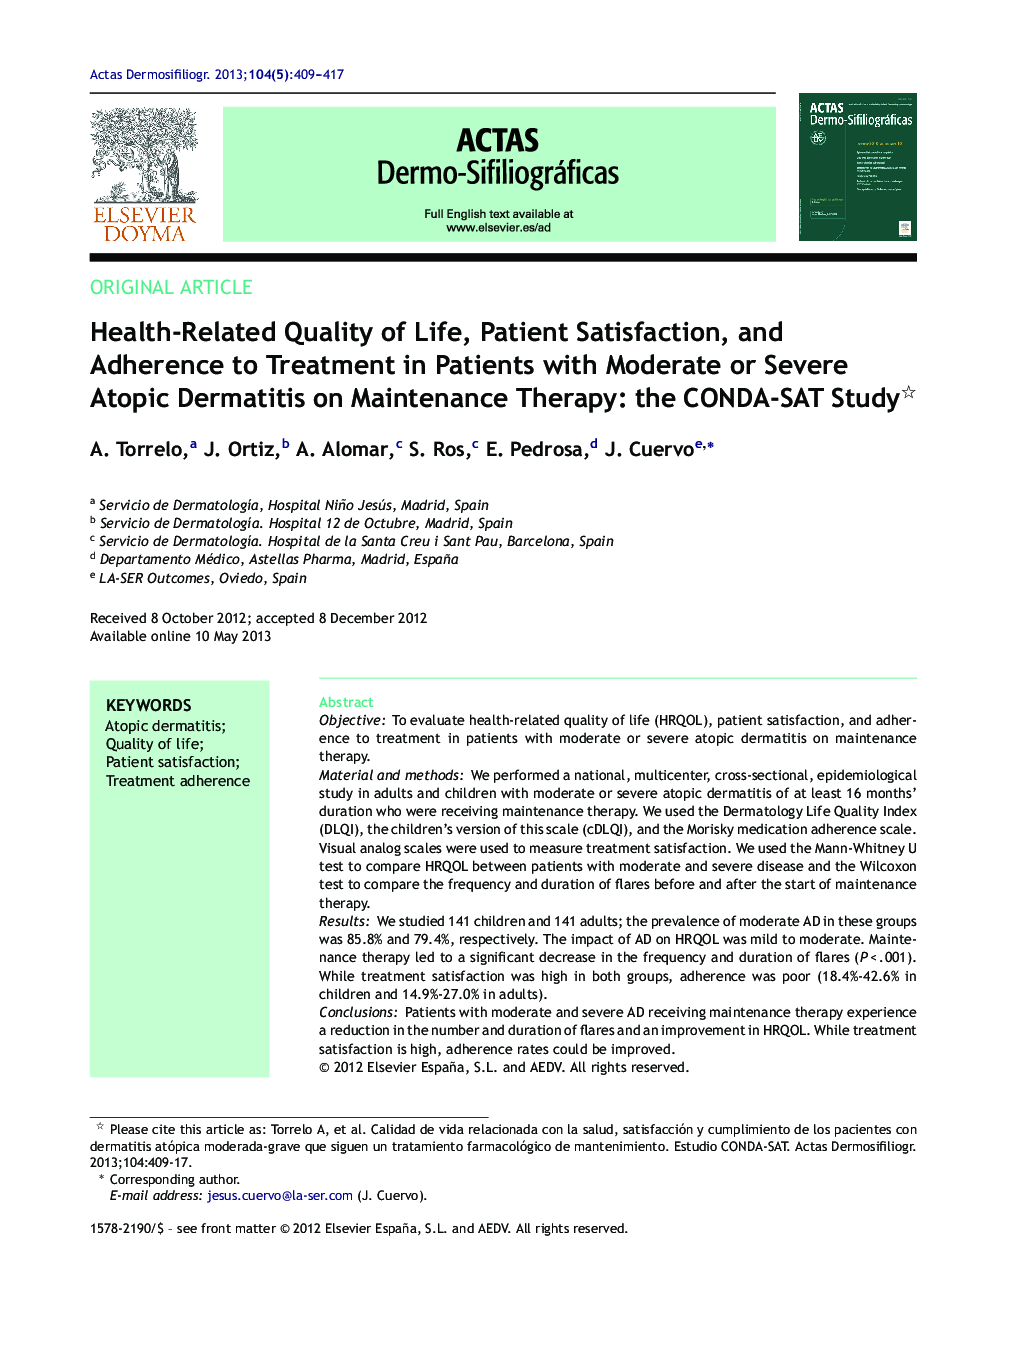 Health-Related Quality of Life, Patient Satisfaction, and Adherence to Treatment in Patients with Moderate or Severe Atopic Dermatitis on Maintenance Therapy: the CONDA-SAT Study 